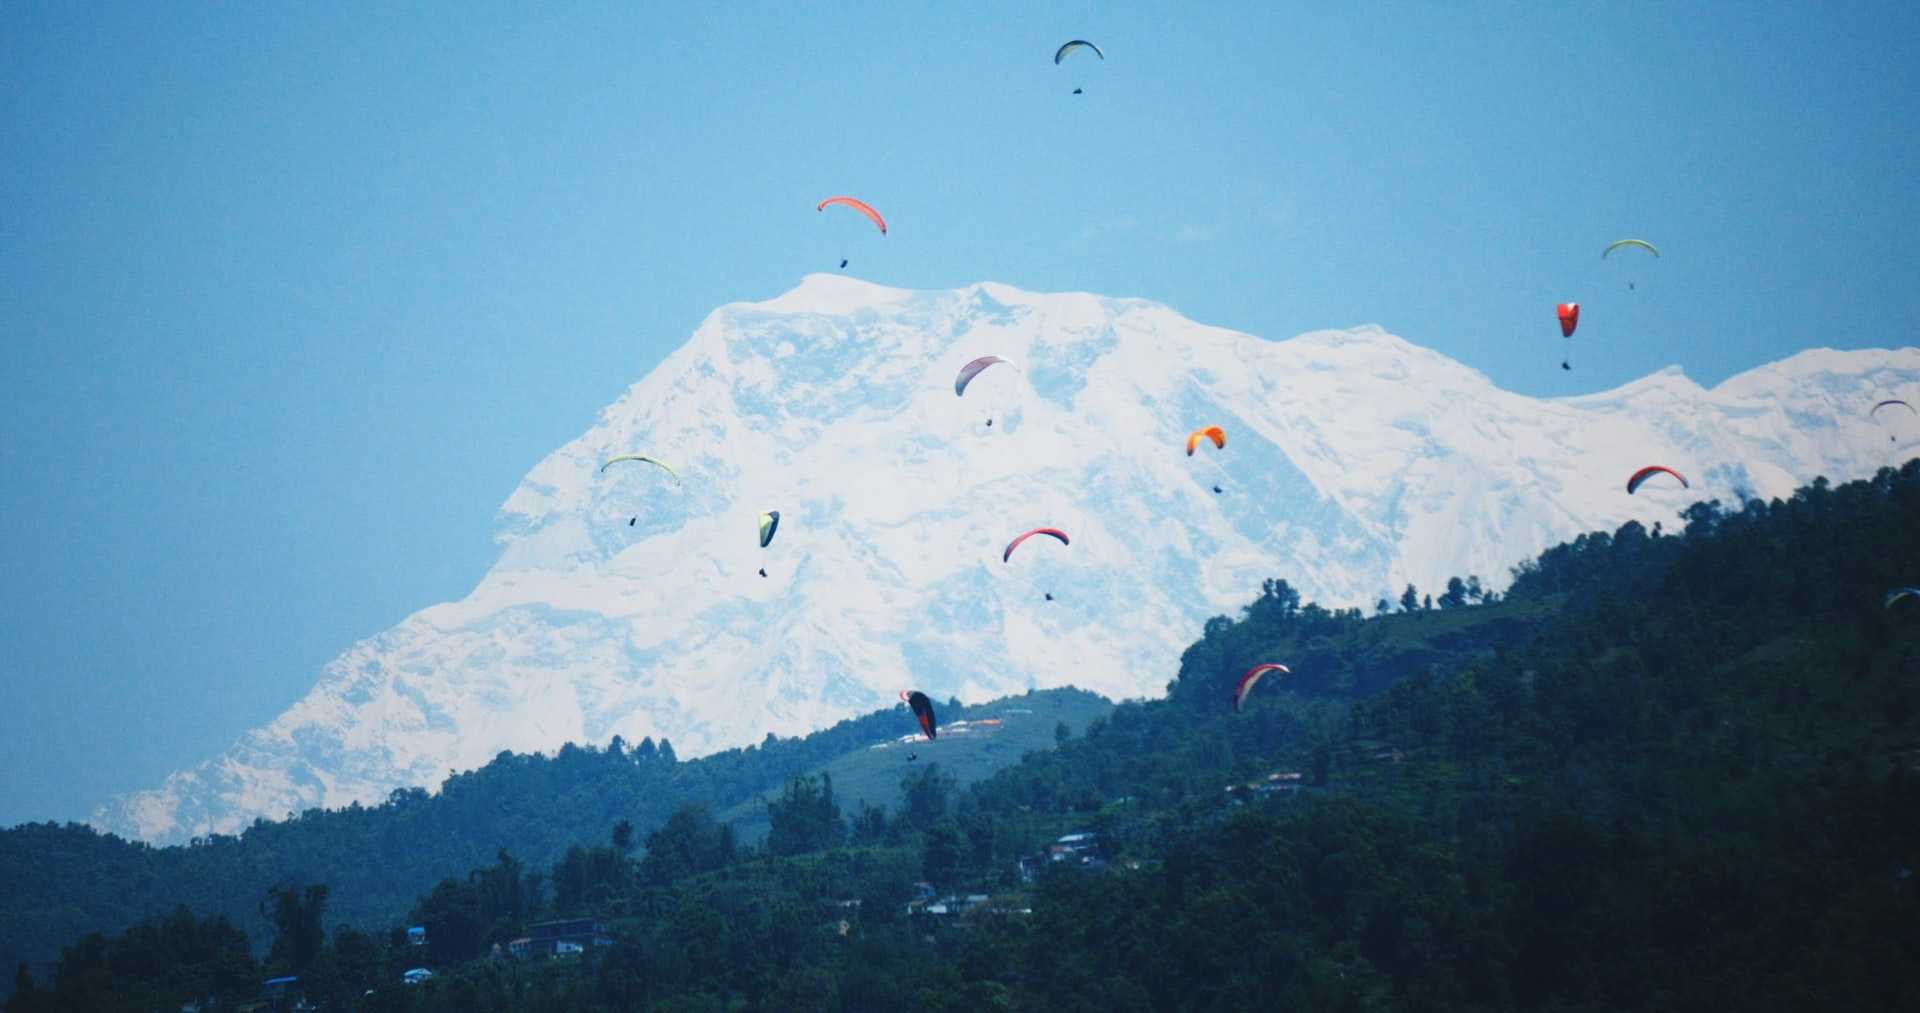 Paragliders on the sky, snow capped mountains on the background.